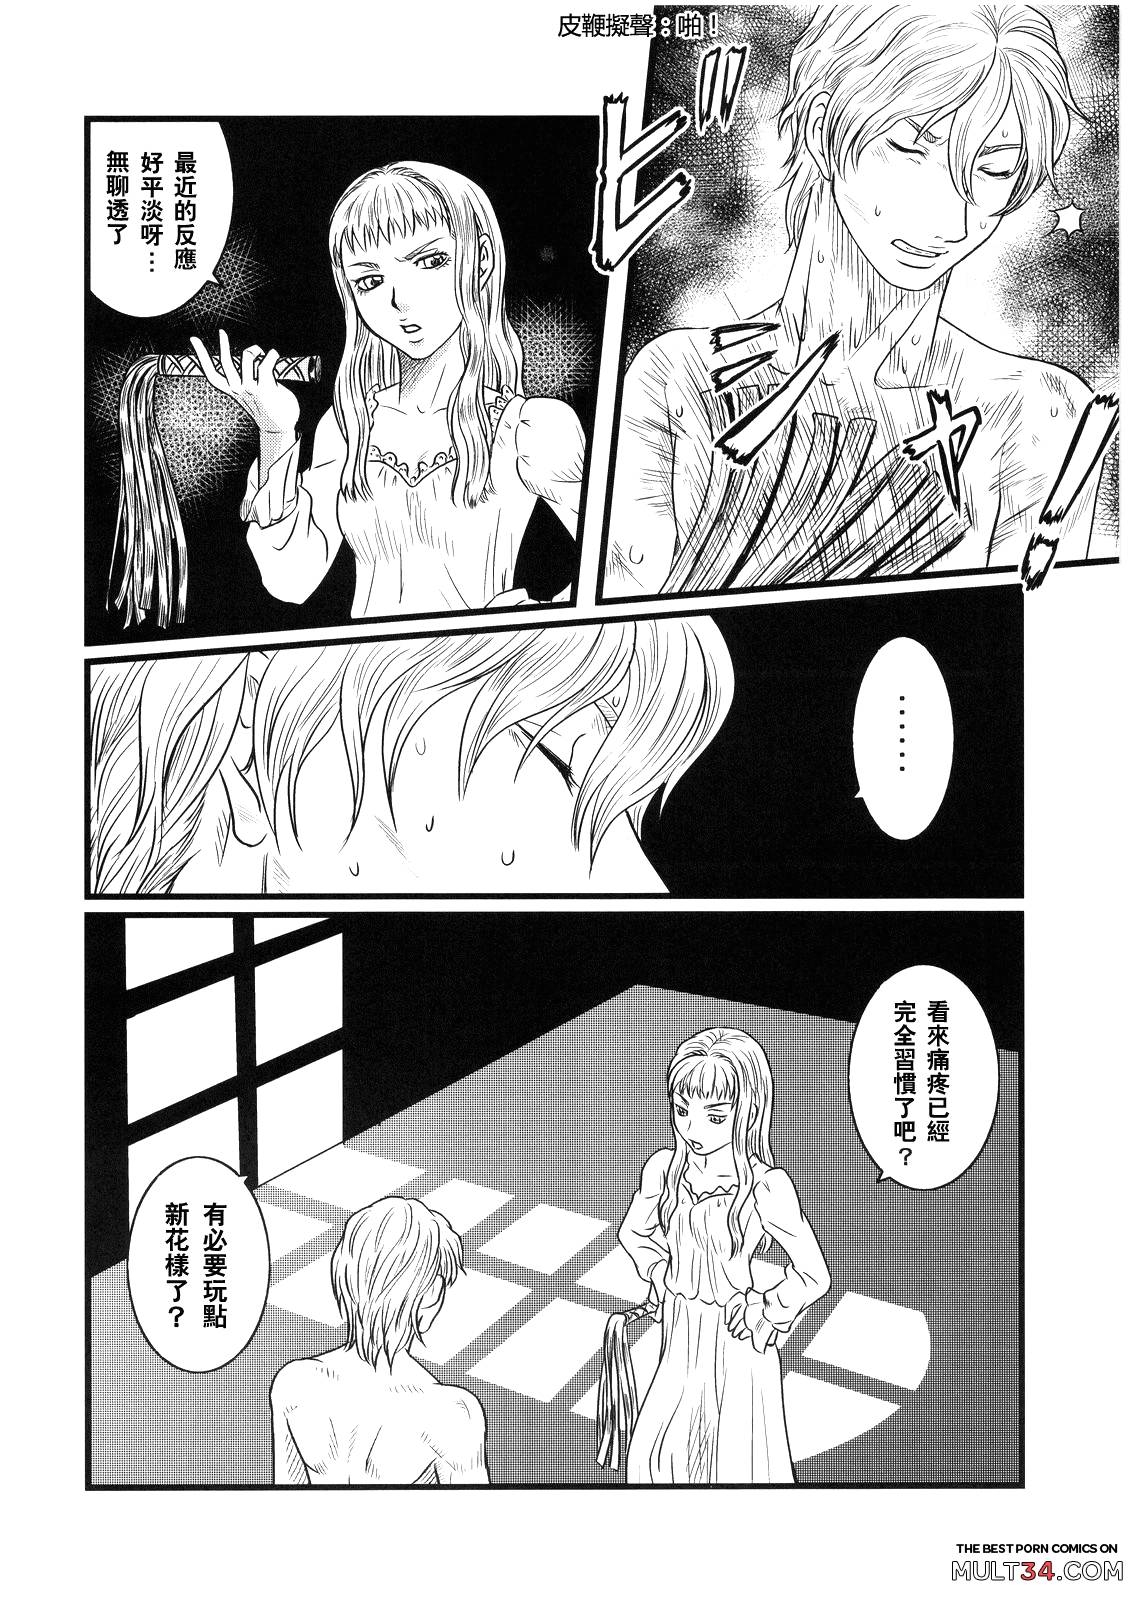 Ibara no Kanmuri - The Crowing with Thorns page 5